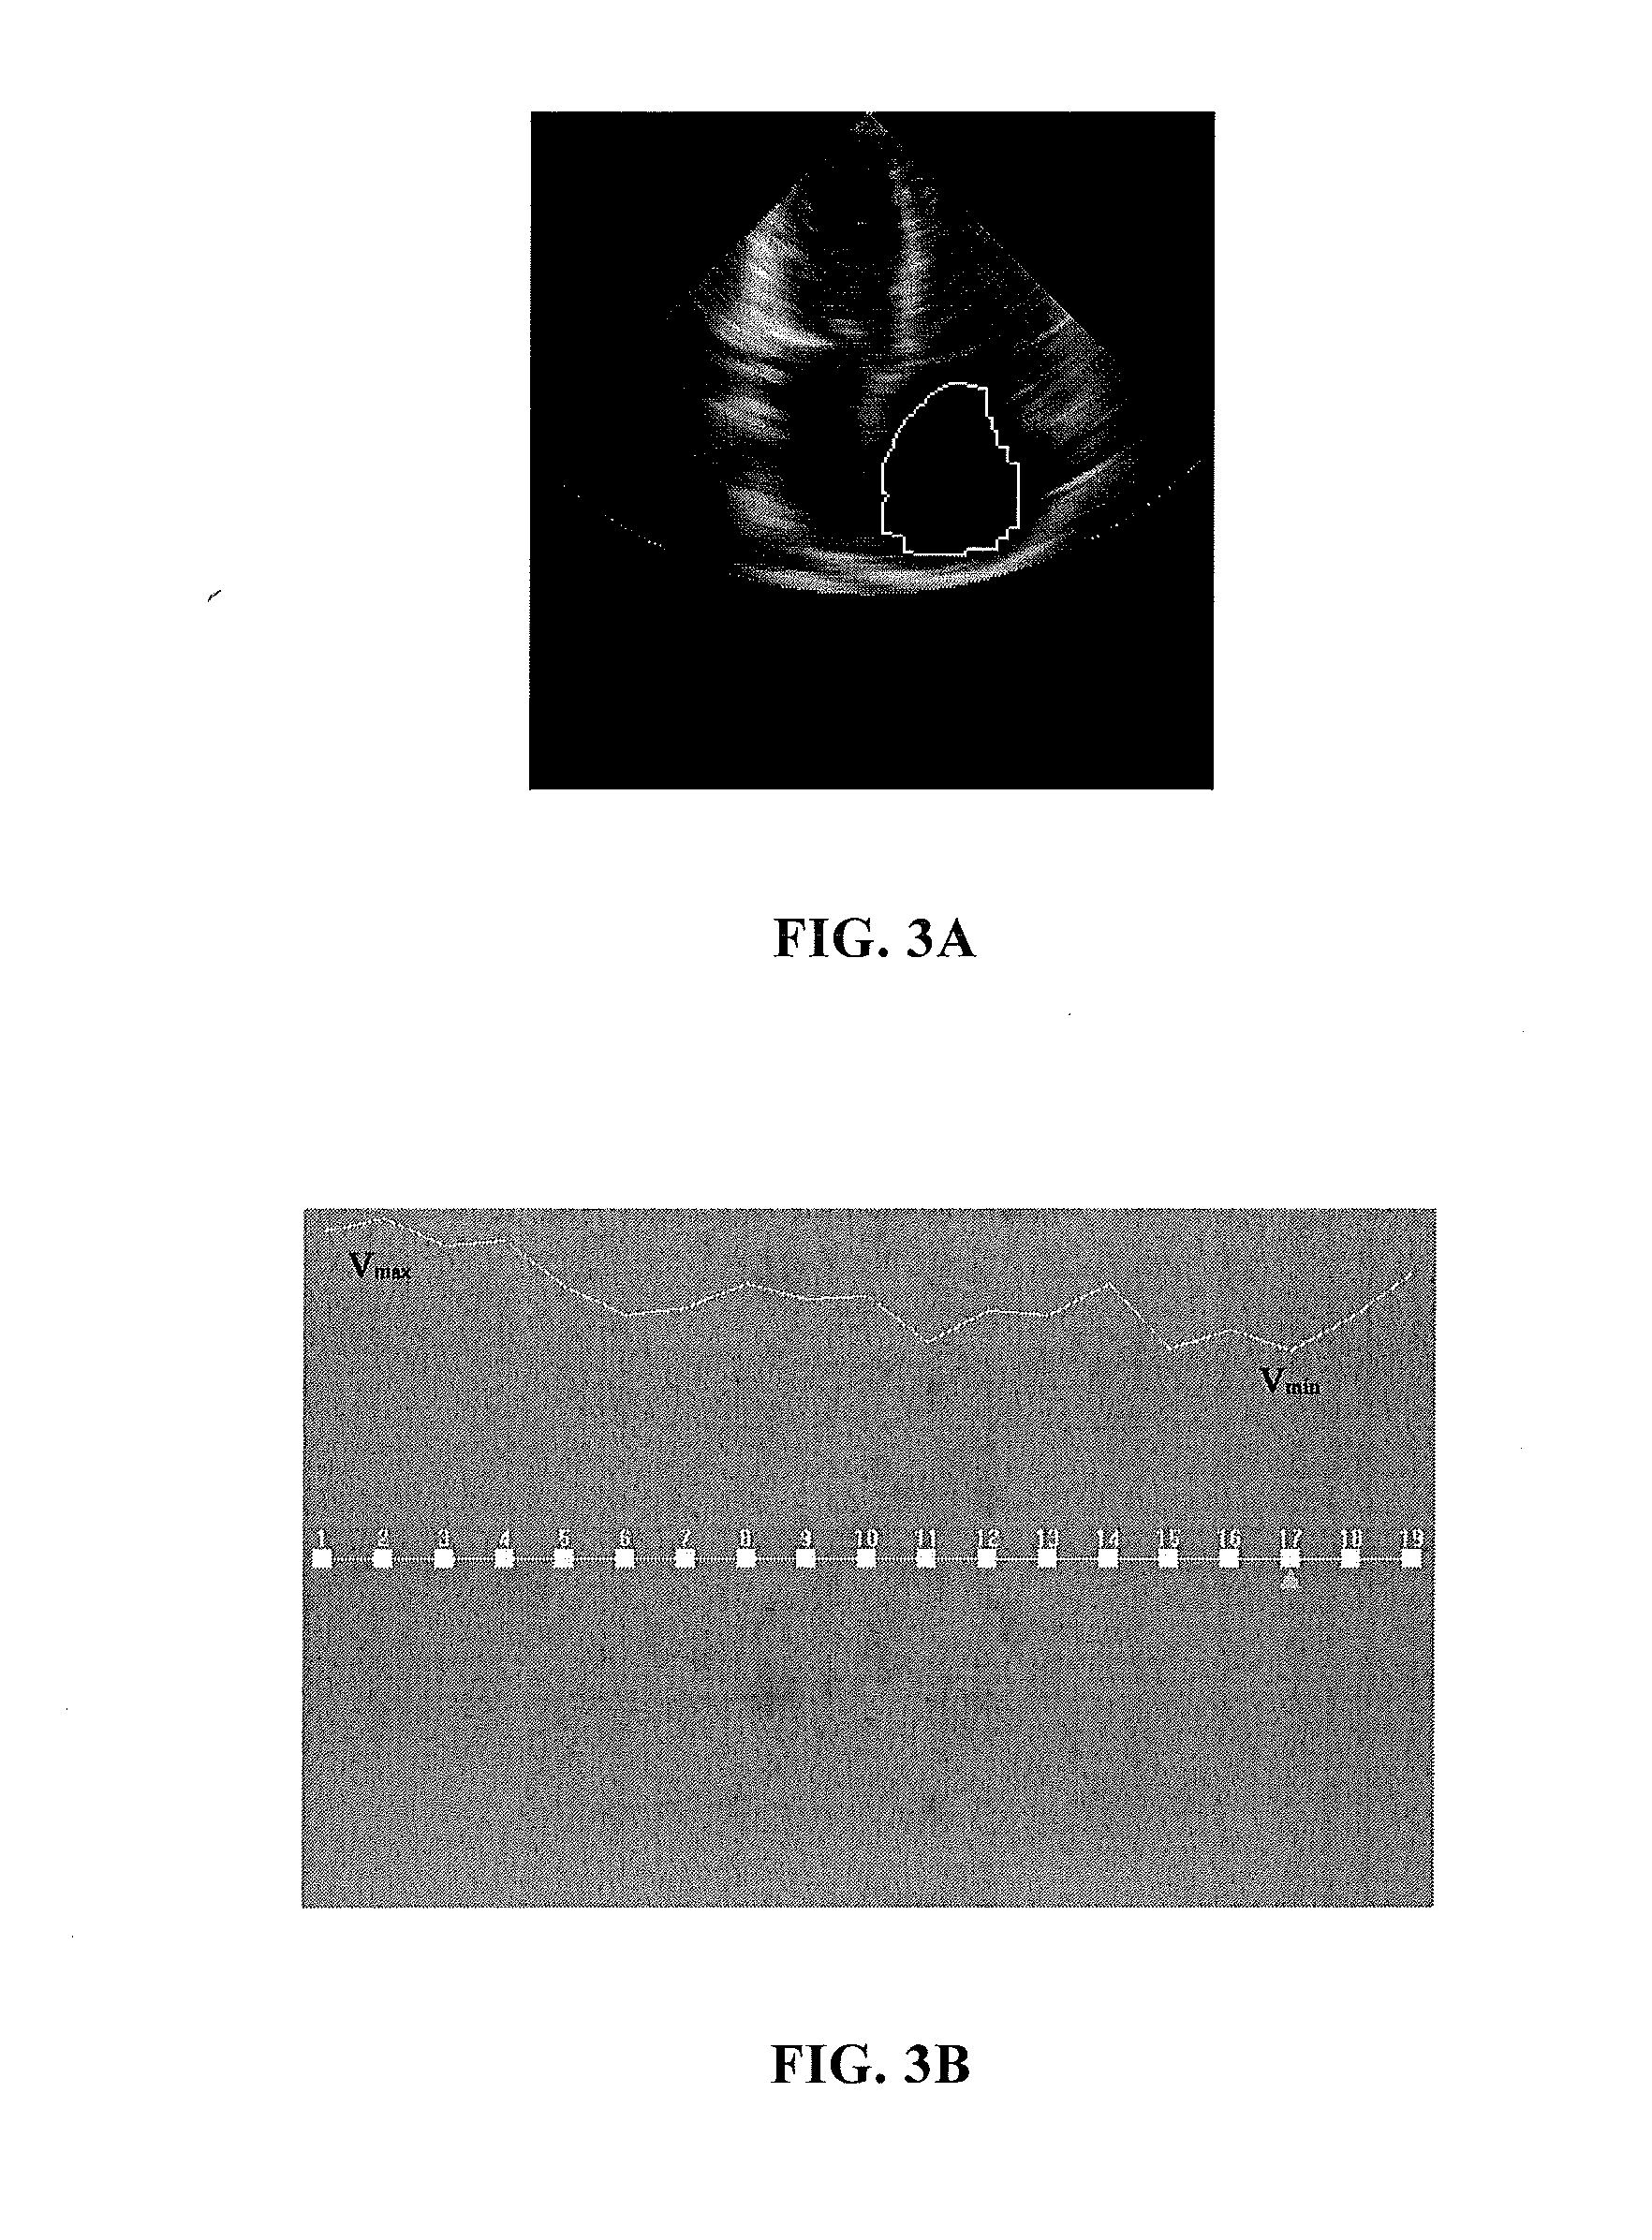 Device and method for determining border of target region of medical images